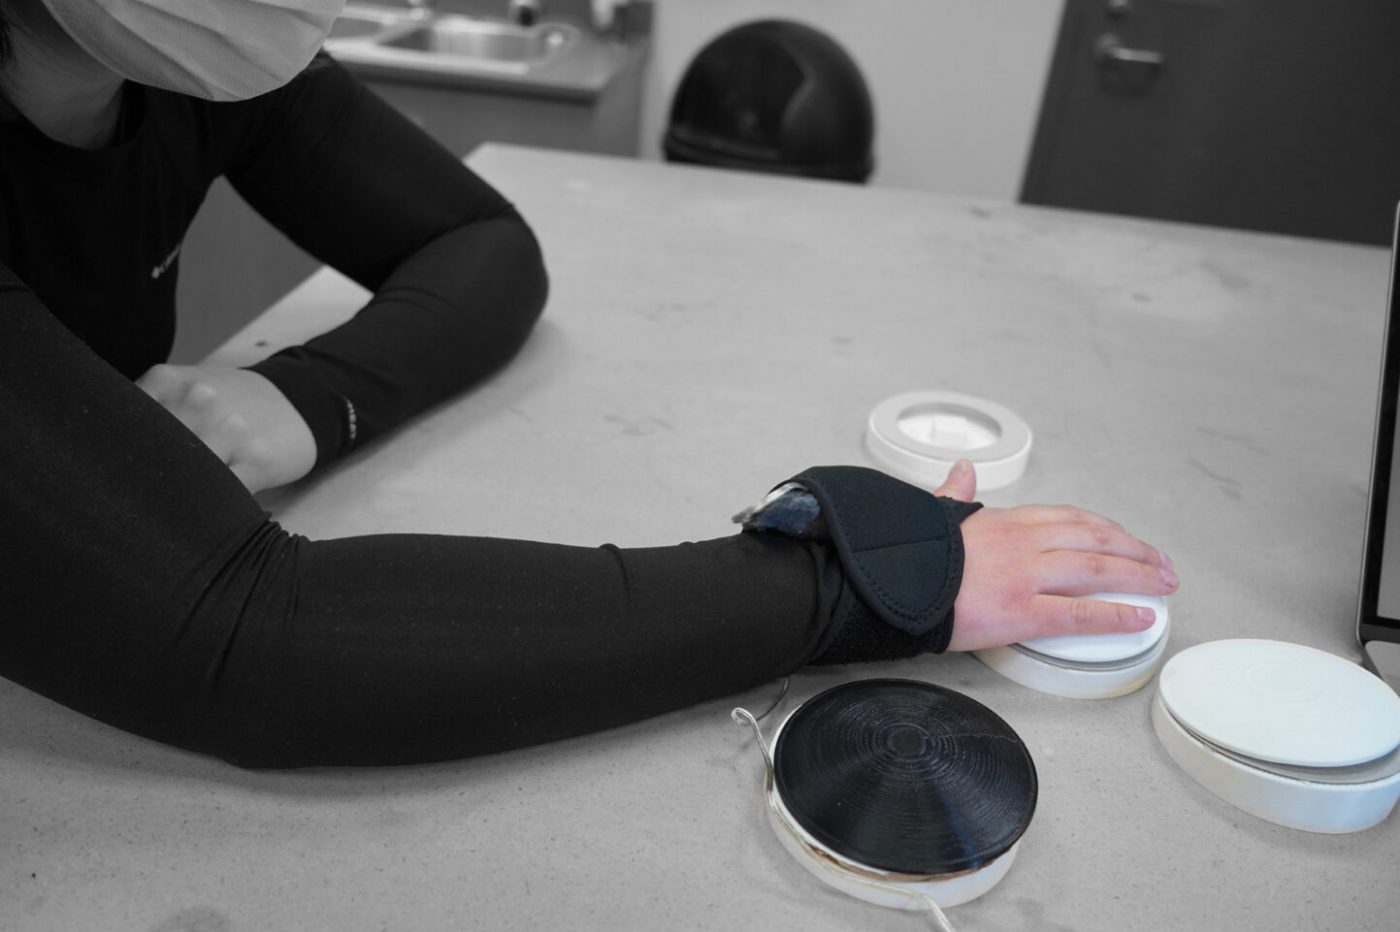 A hand with a black hand wrap is rested on a white circular device